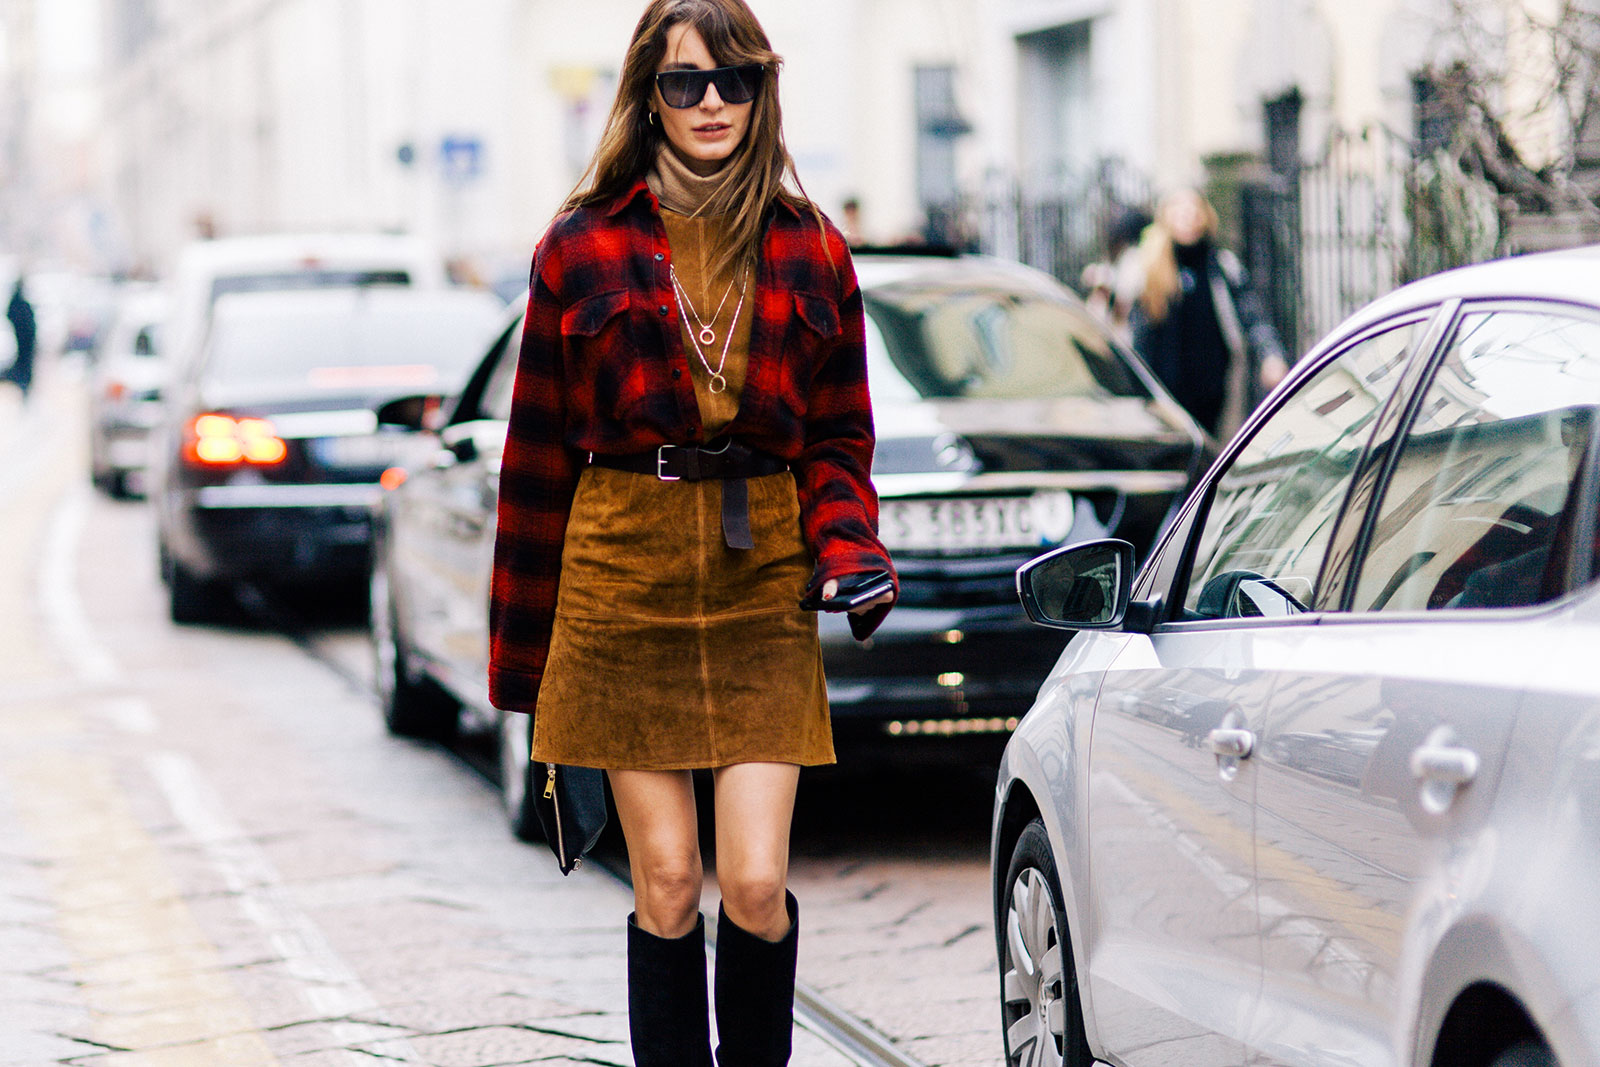 Ece Sukan wearing Ralph Lauren suede dress and checked shirt in Milan, Italy